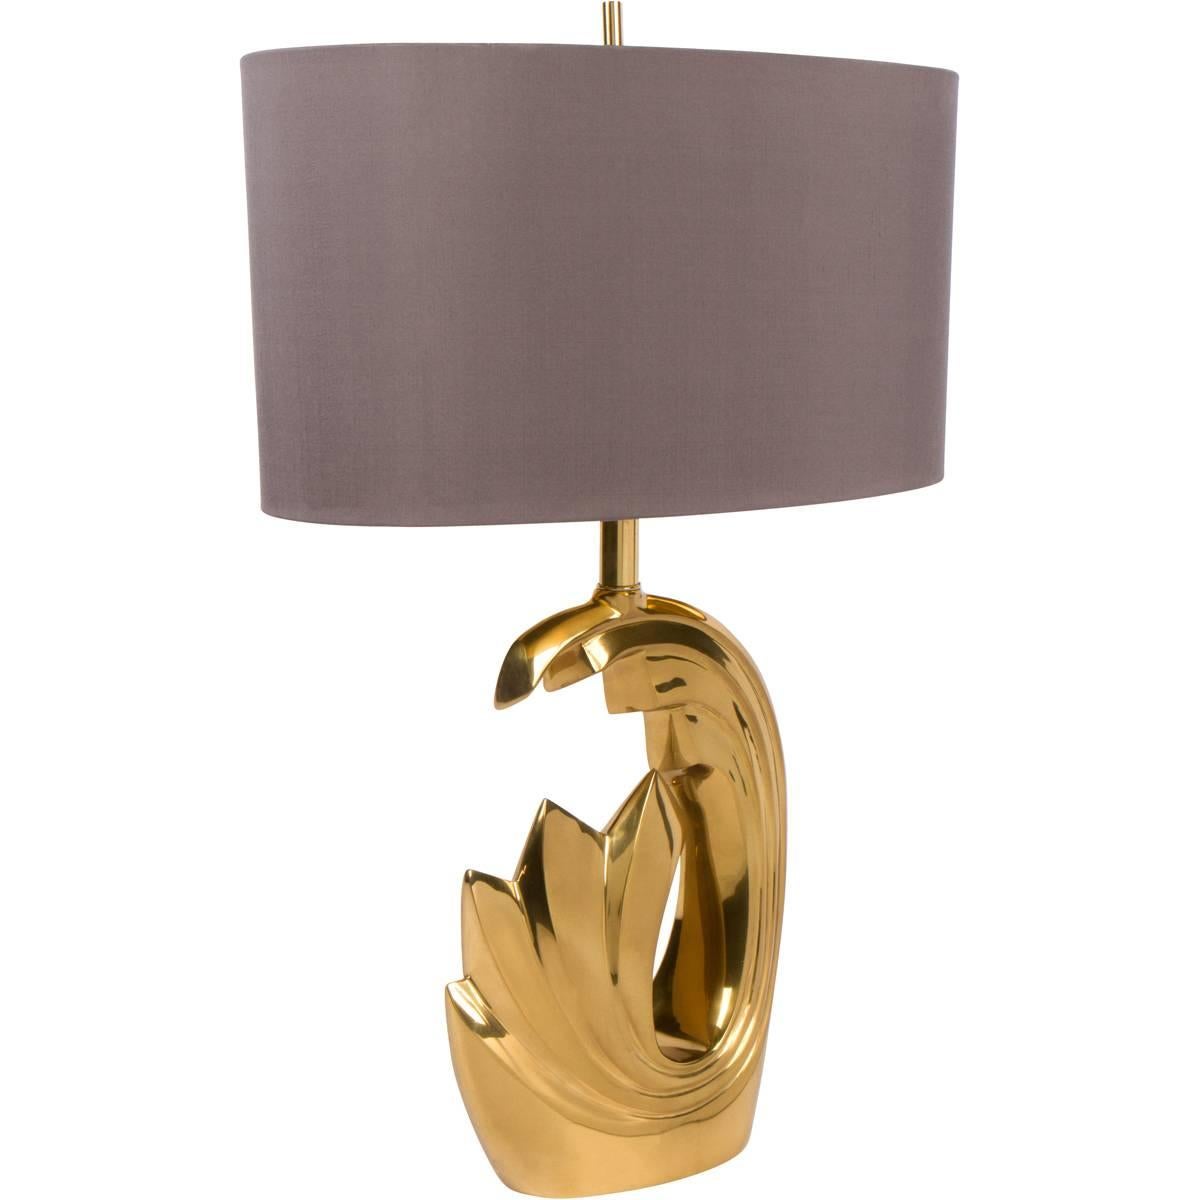 Chic brass lamp attributed to Pierre Cardin in the 1970s. Perfect size for a desk or console table. New custom gray silk shade.